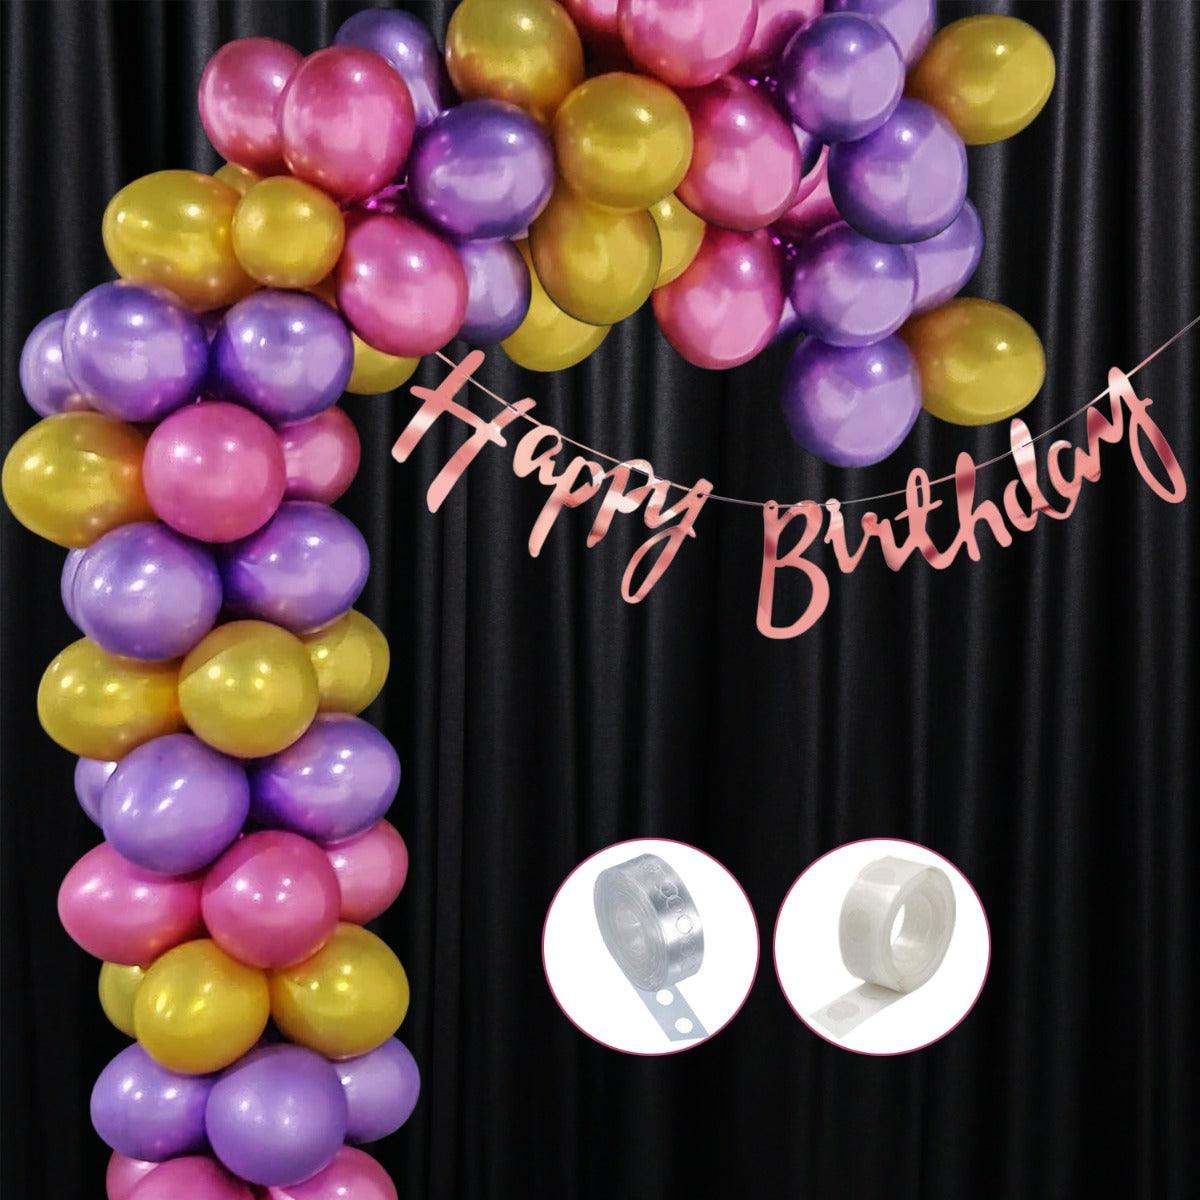 PartyCorp Happy Birthday Decoration Kit Combo 75 Pcs - Pink, Gold & Purple Chrome Balloons, Rose Gold Happy birthday Cut Out Banner